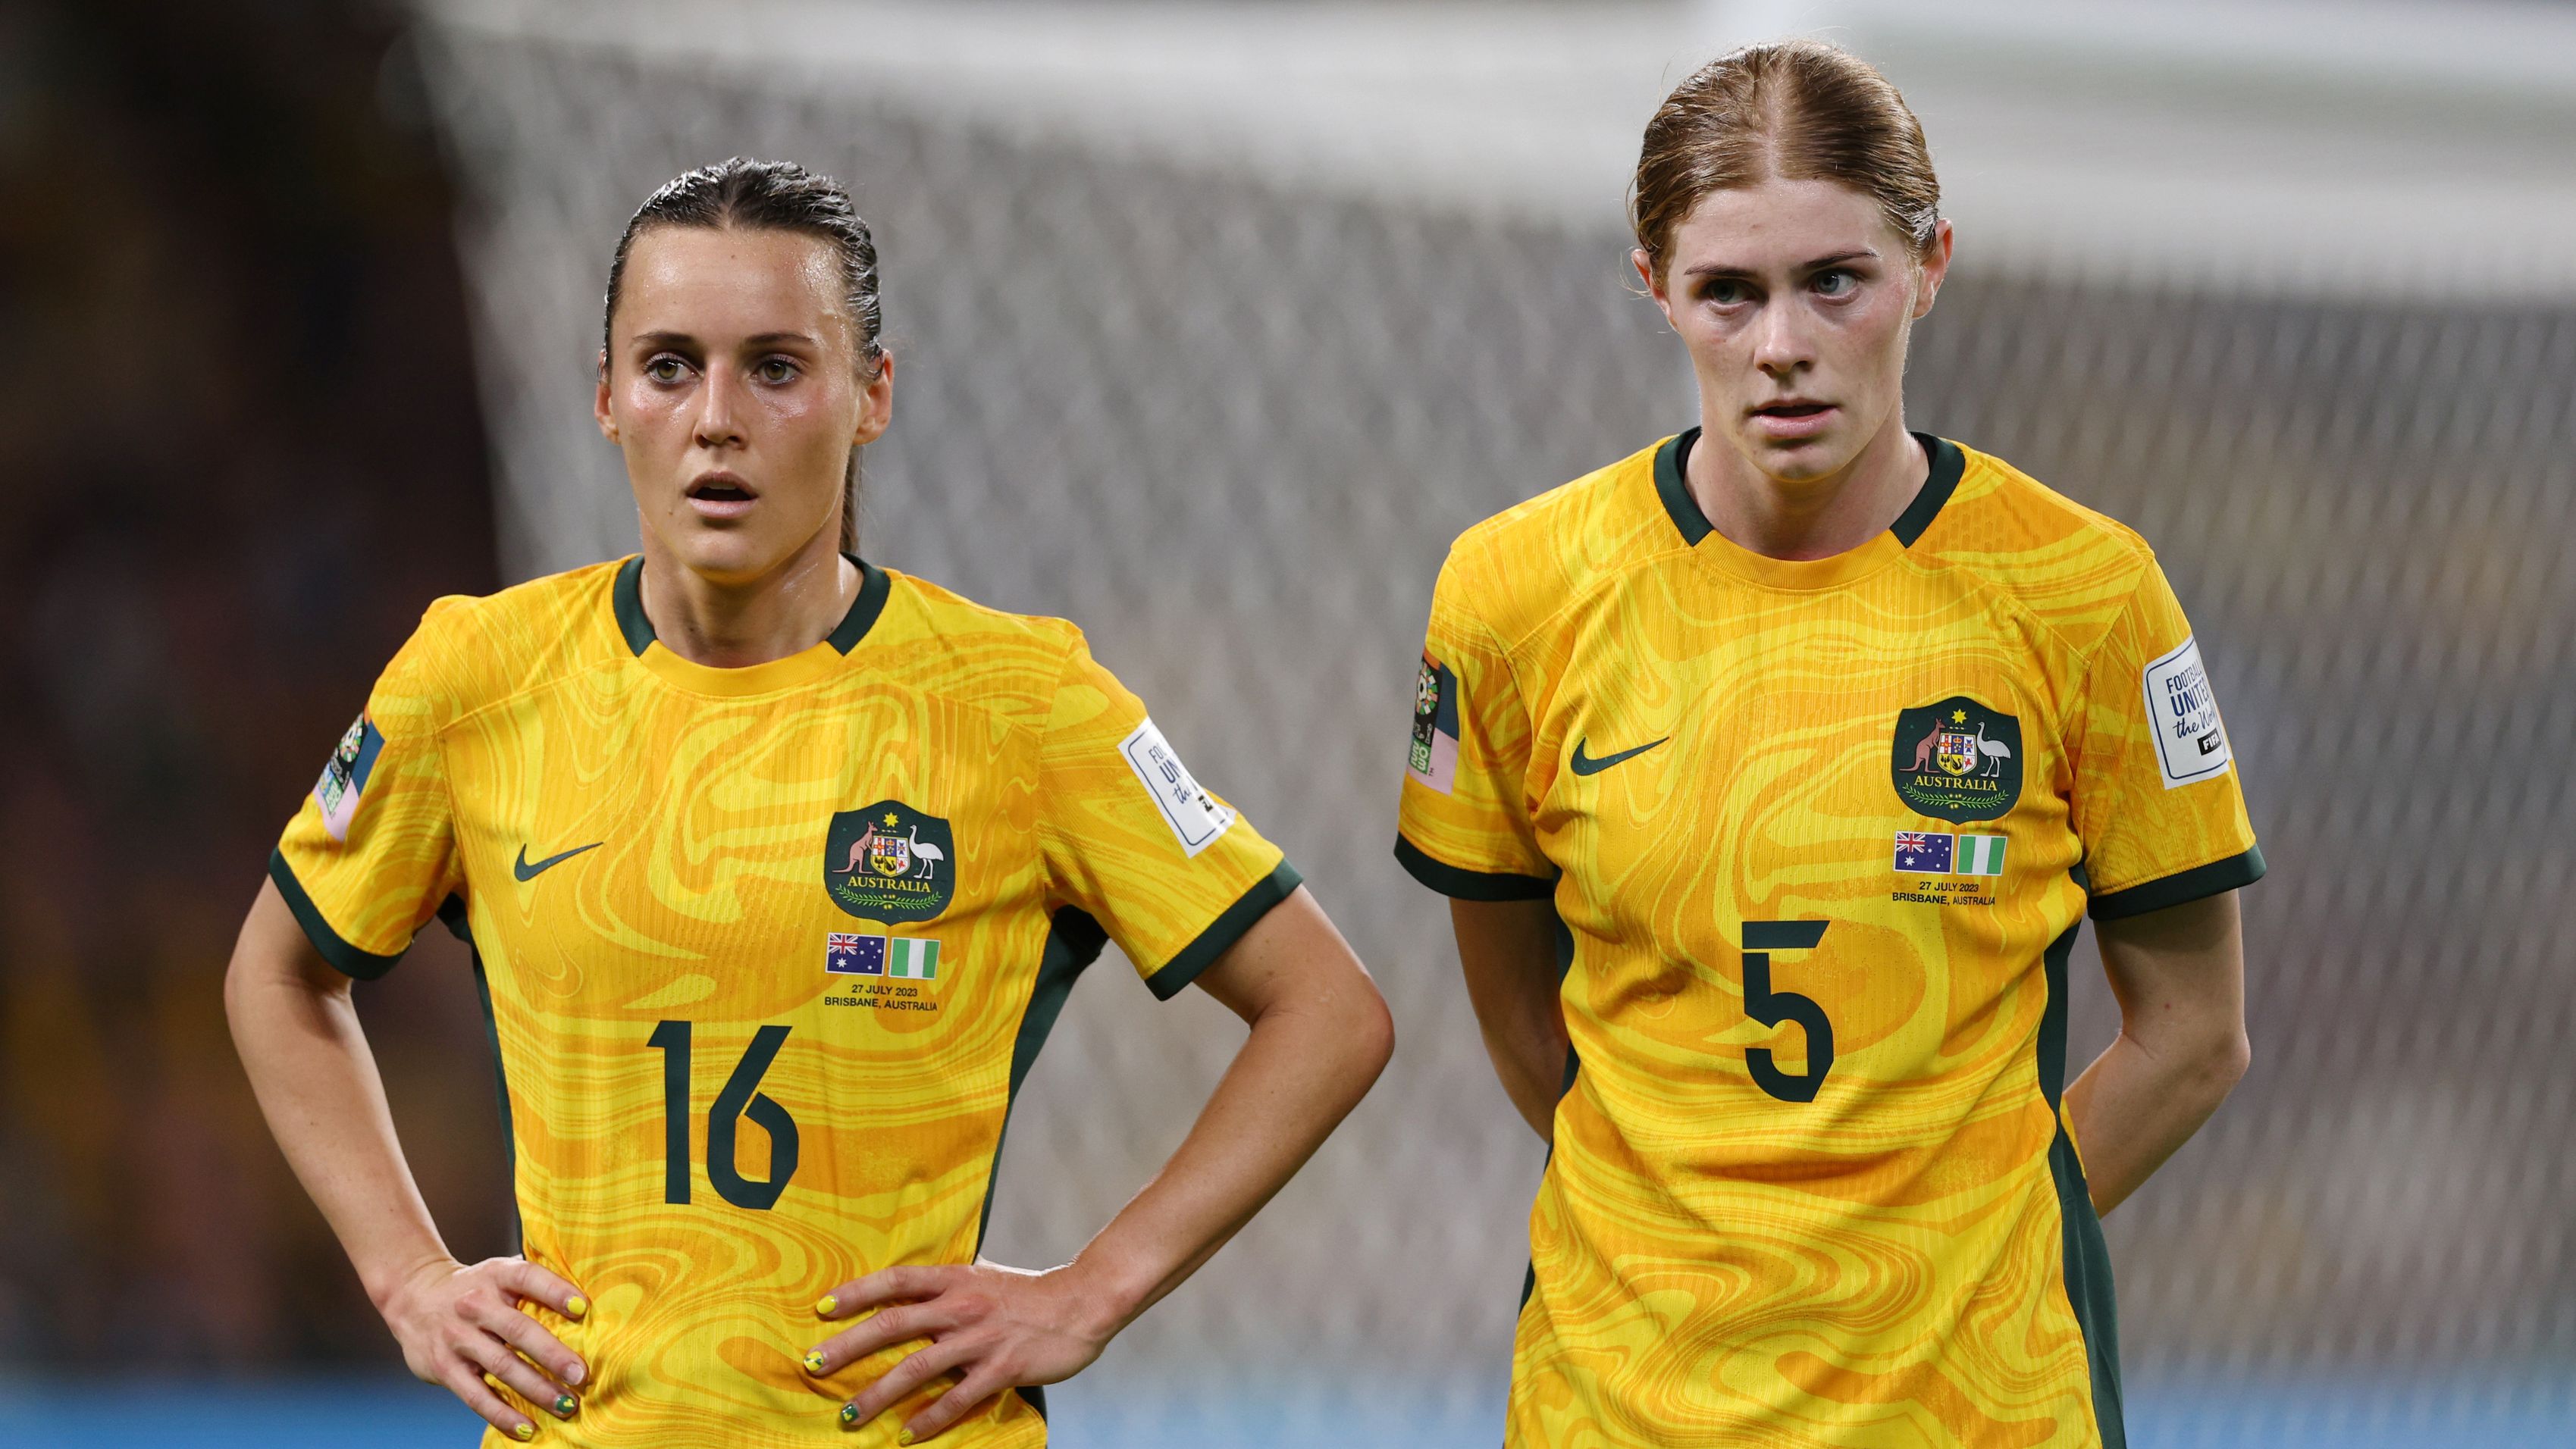 BRISBANE, AUSTRALIA - JULY 27: Hayley Raso and Cortnee Vine of Australia are seen during the FIFA Women&#x27;s World Cup Australia &amp; New Zealand 2023 Group B match between Australia and Nigeria at Brisbane Stadium on July 27, 2023 in Brisbane / Meaanjin, Australia. (Photo by Elsa - FIFA/FIFA via Getty Images)